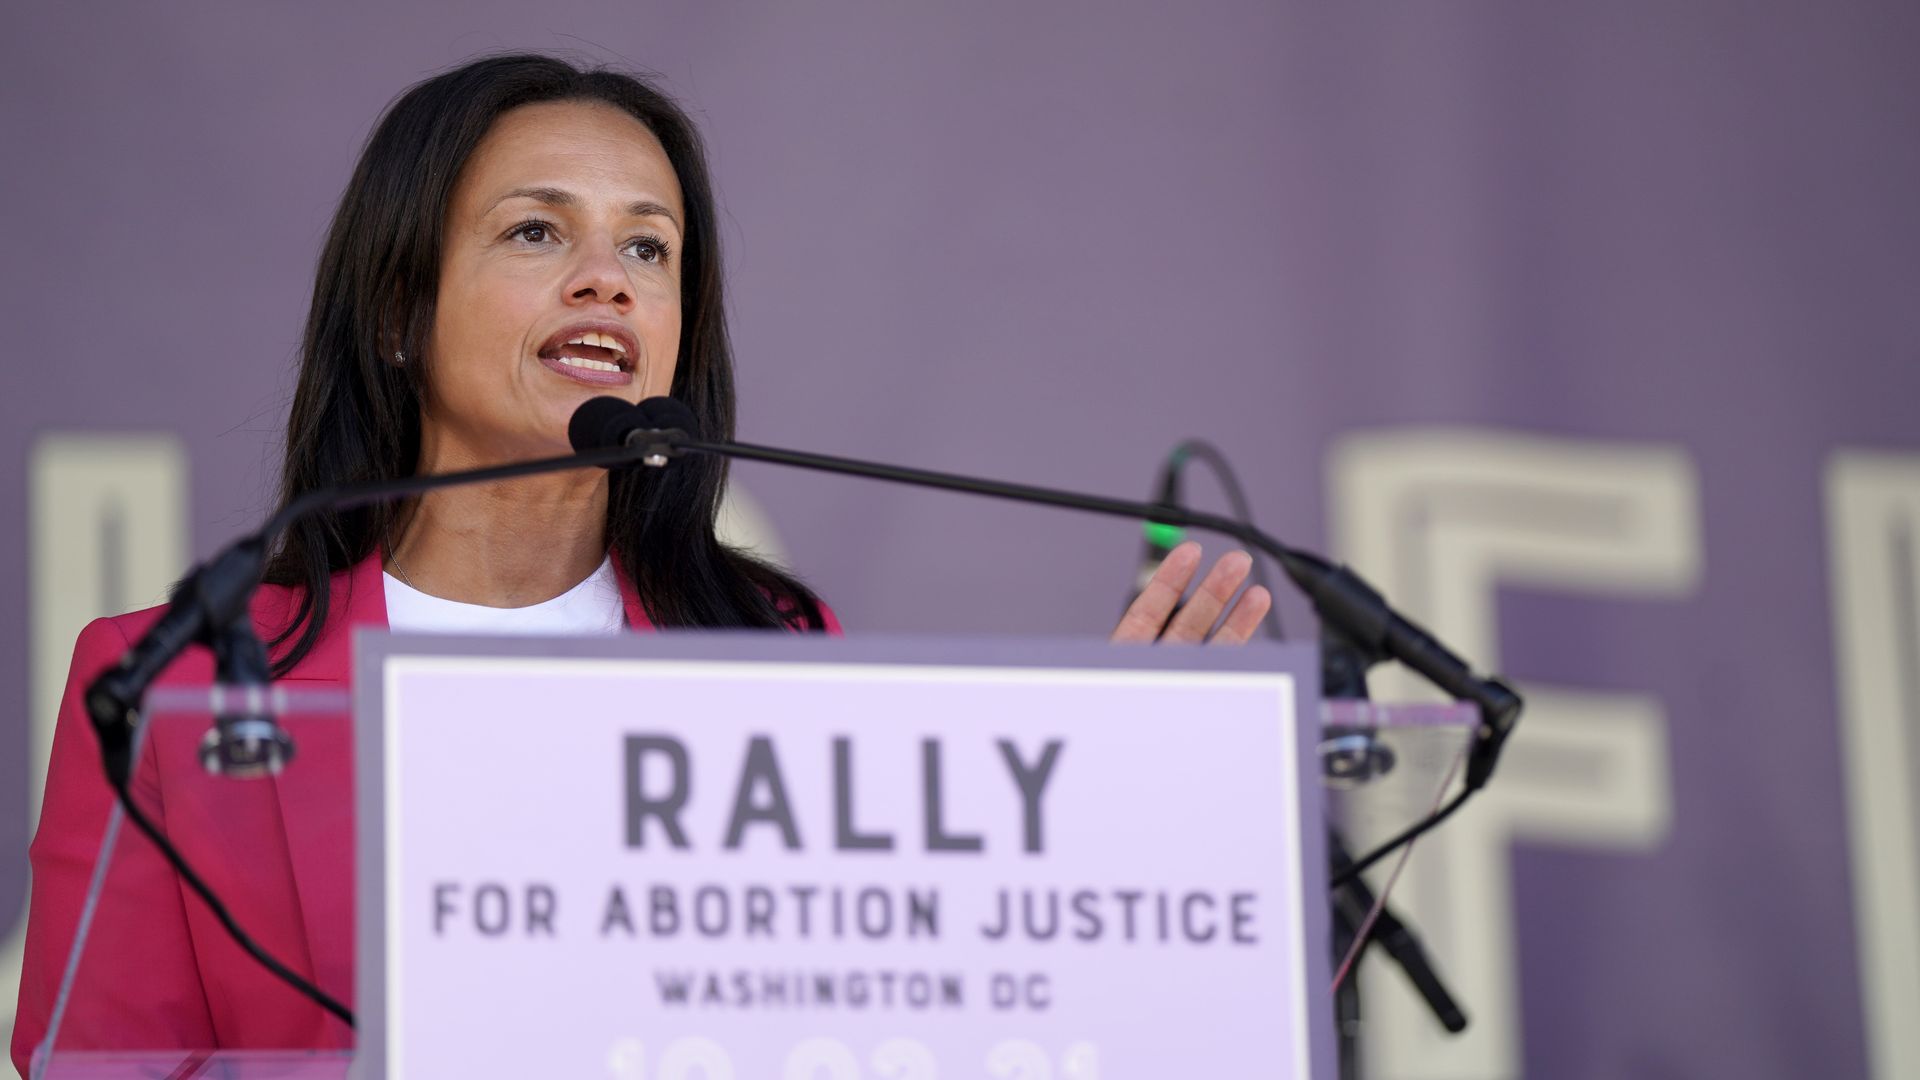 Planned Parenthood President Alexis McGill Johnson is seen speaking at an abortion rights rally.